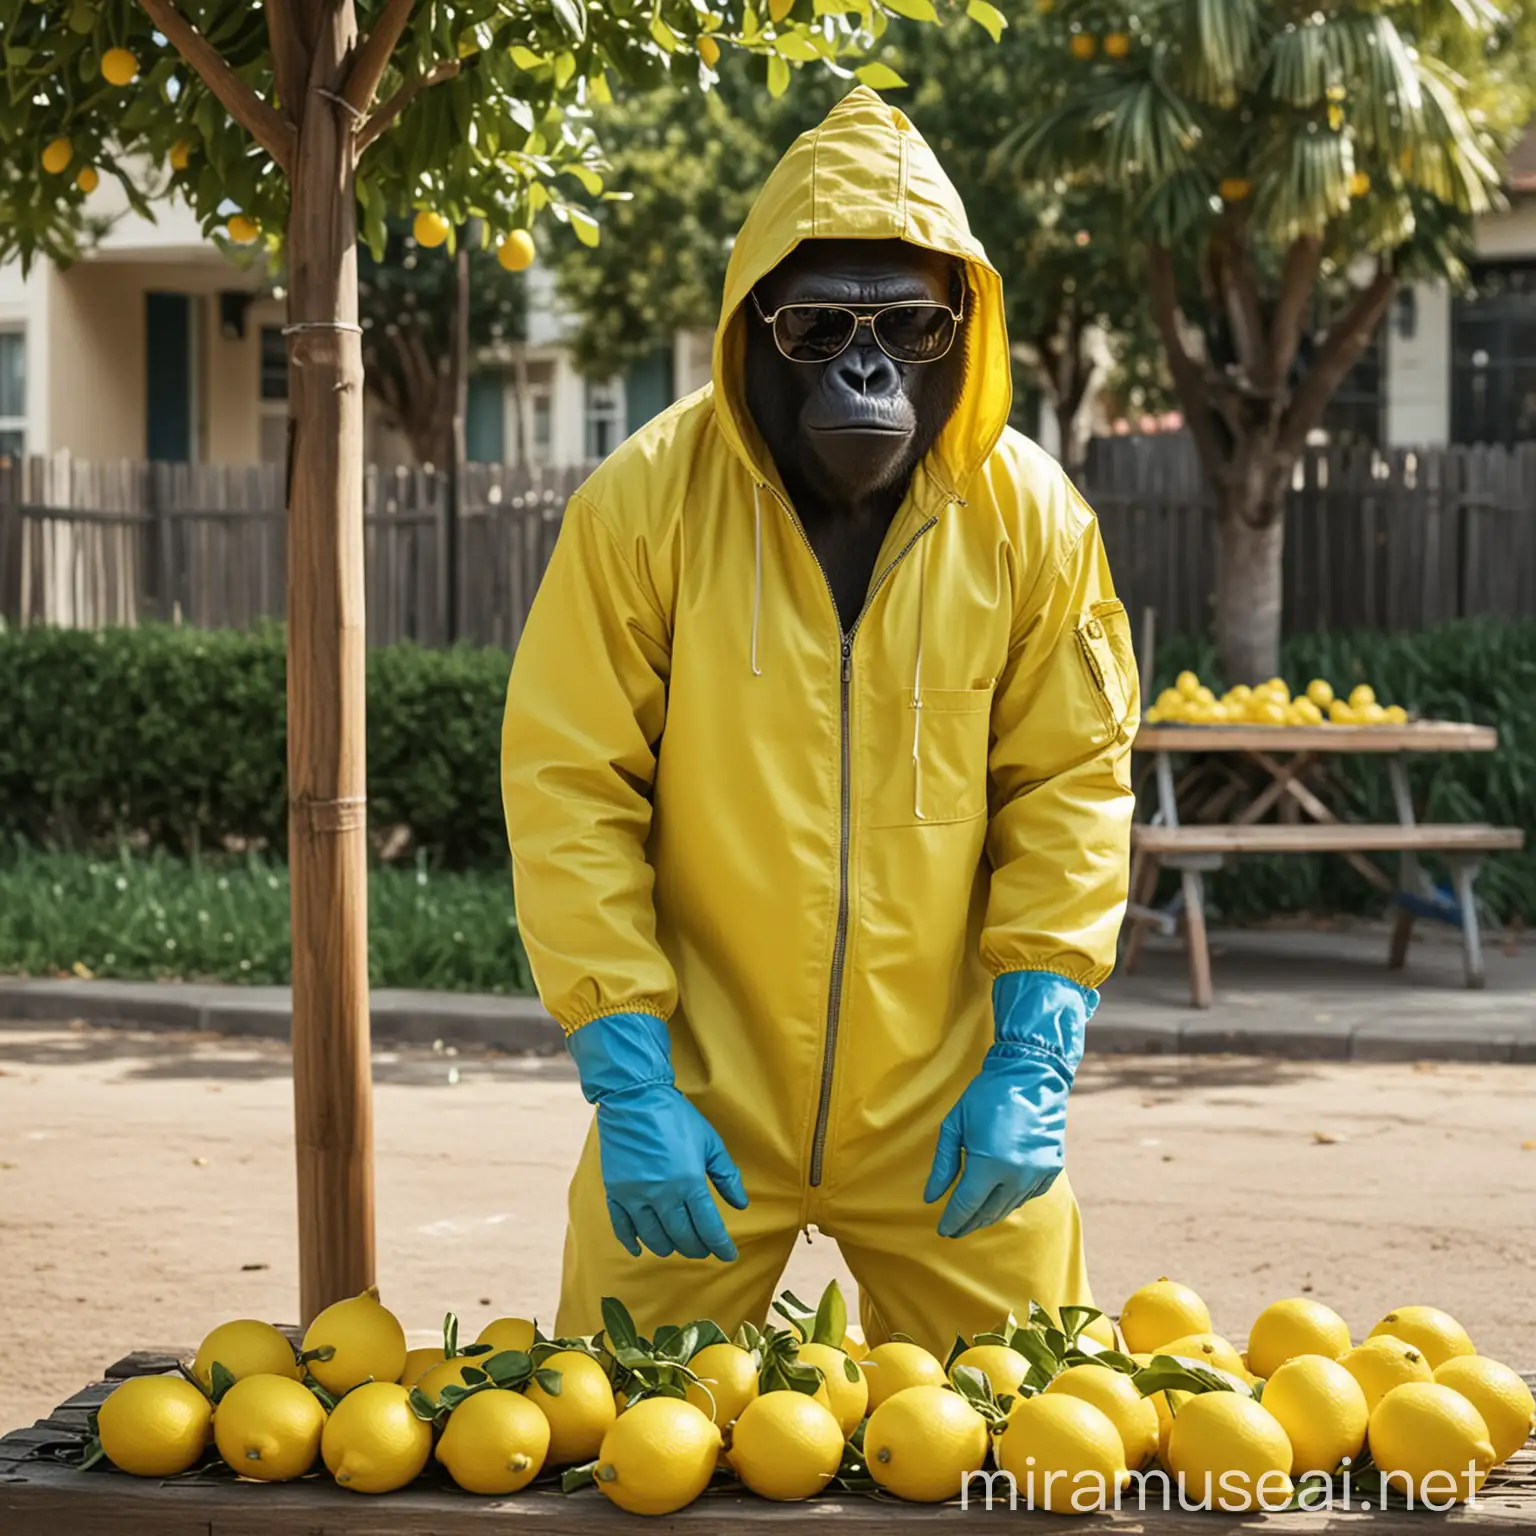 Gorilla dressed in a yellow jumpsuit like the one from the series Breaking Bad. He wears dark sunglasses with a black frame. The hood covers his head and he wears light blue latex gloves. He wears dark sunglasses with a black frame. The hood covers his head and he wears light blue latex gloves. He is standing behind a lemonade stand on a sunny street. Around the stand there are many lemons lying on the ground. Real photographic style